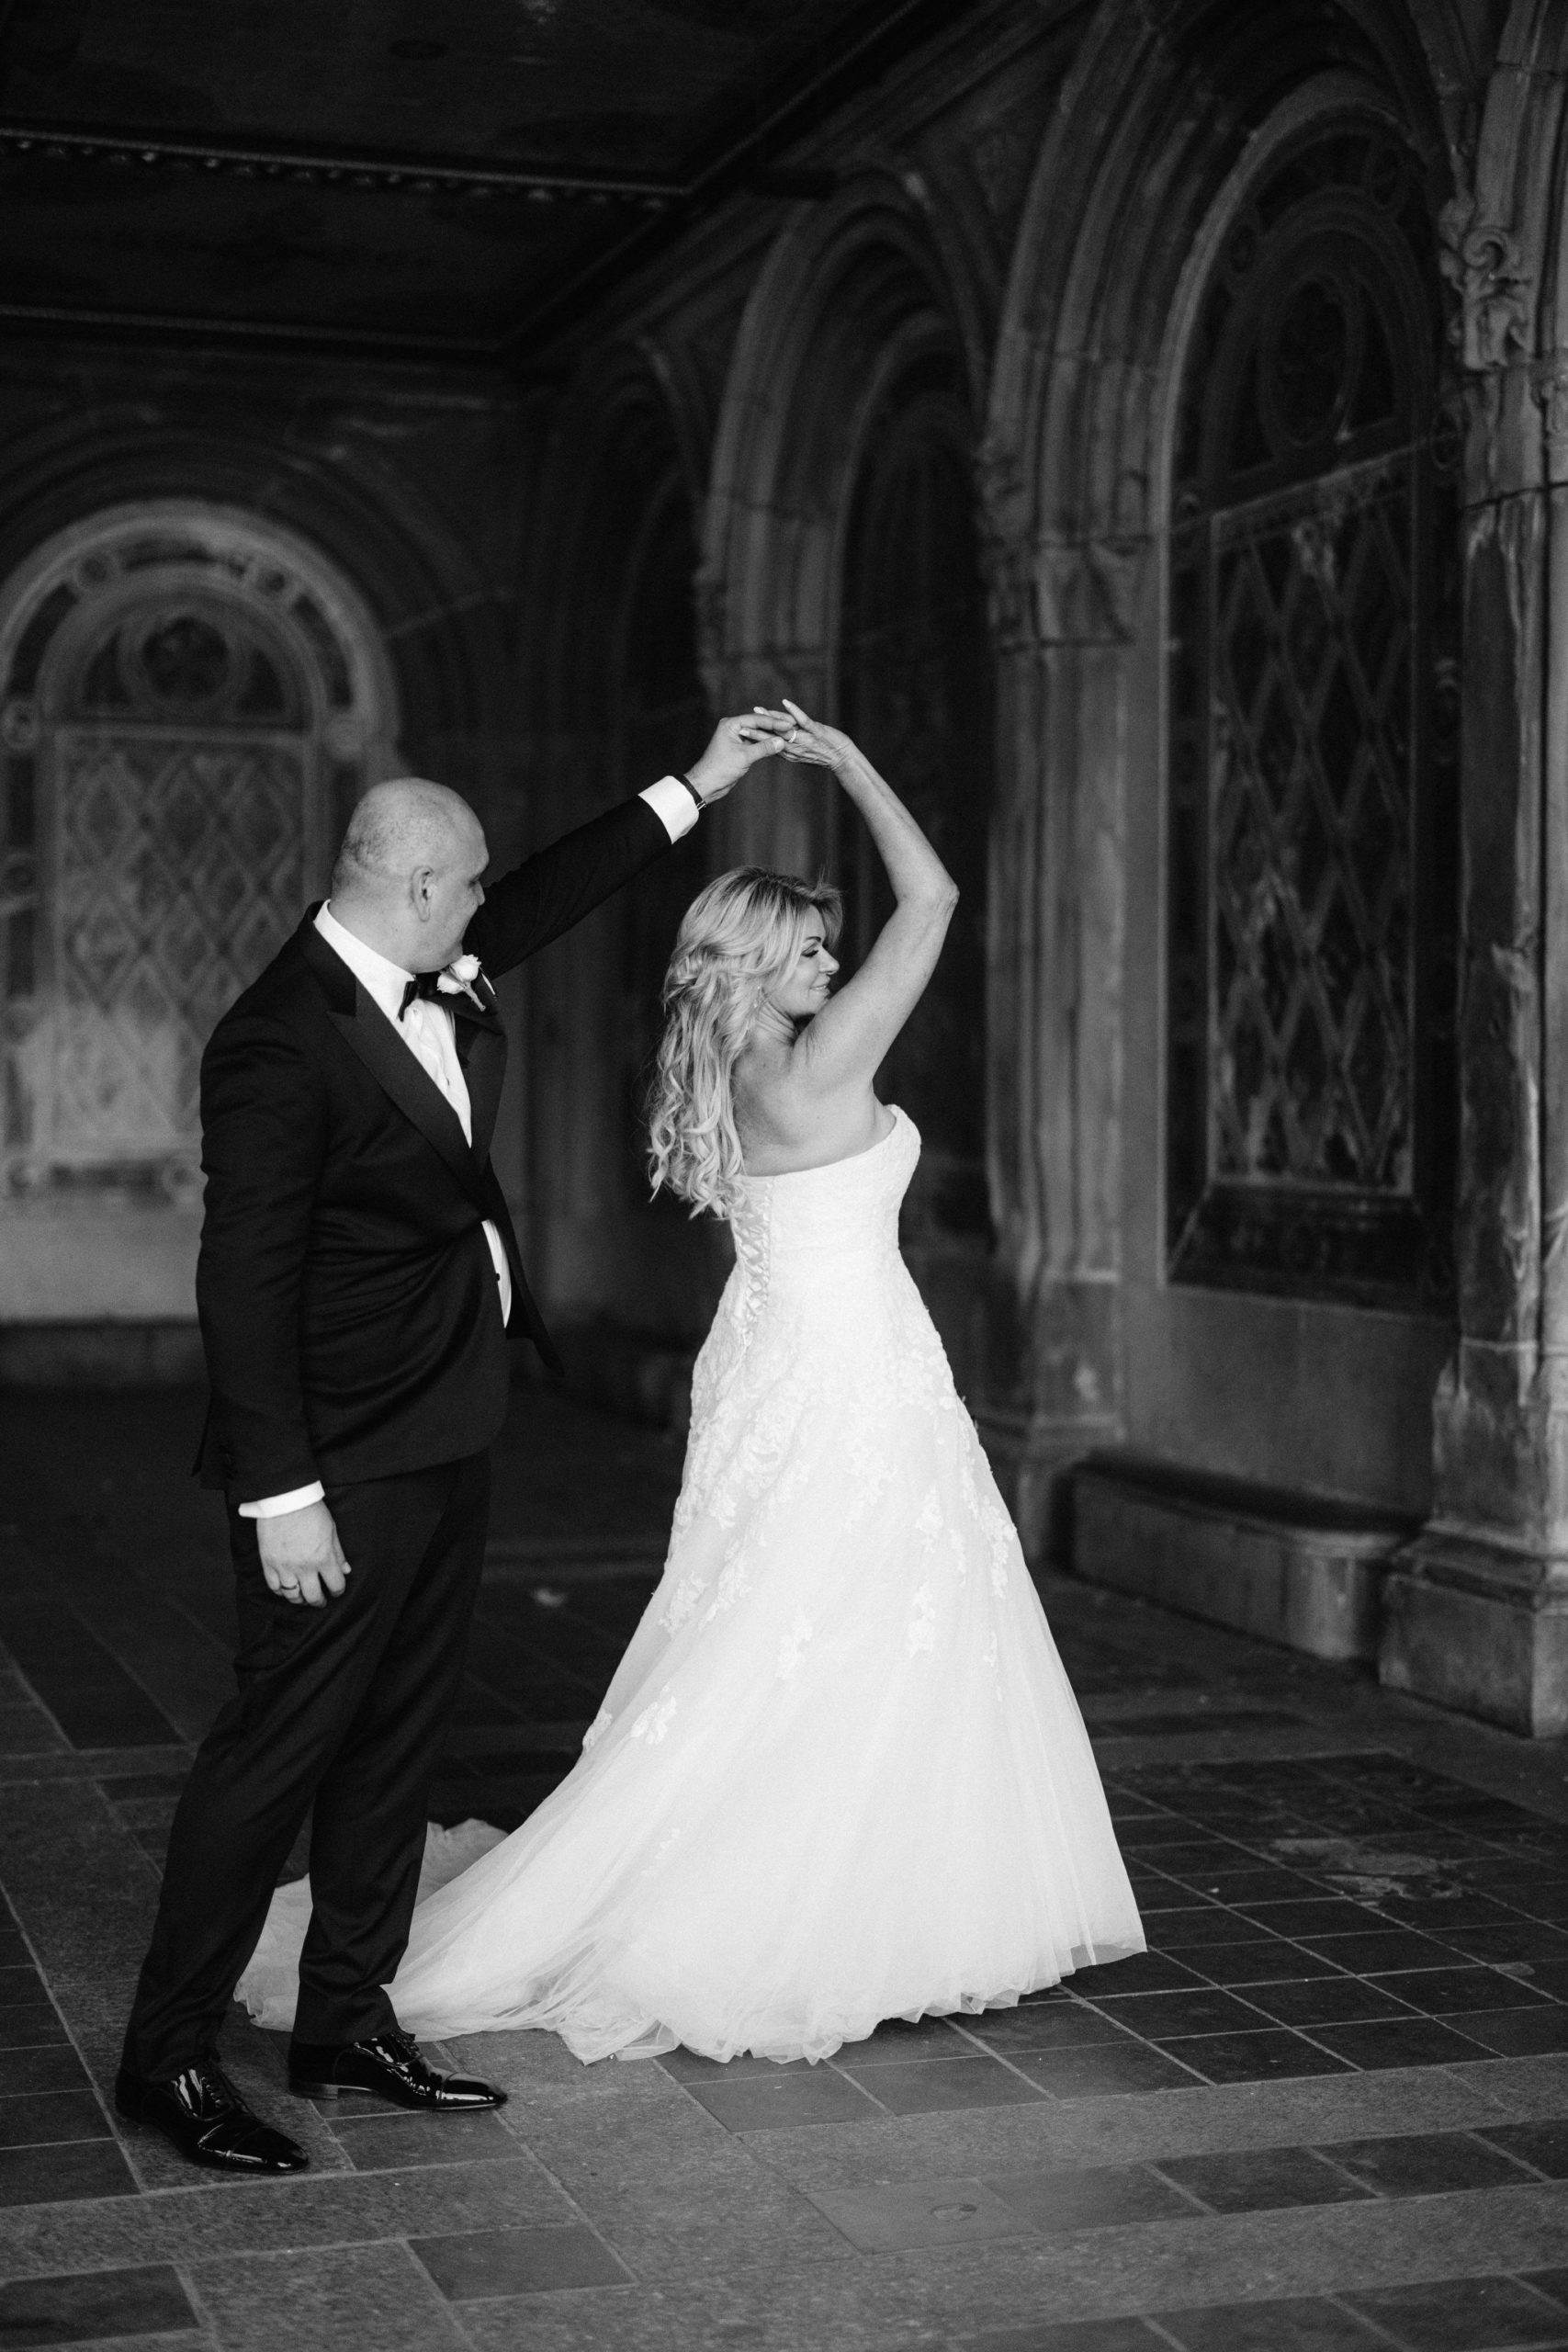 Man twirls his wife in her wedding dress, in a New York City cathedral on their wedding day